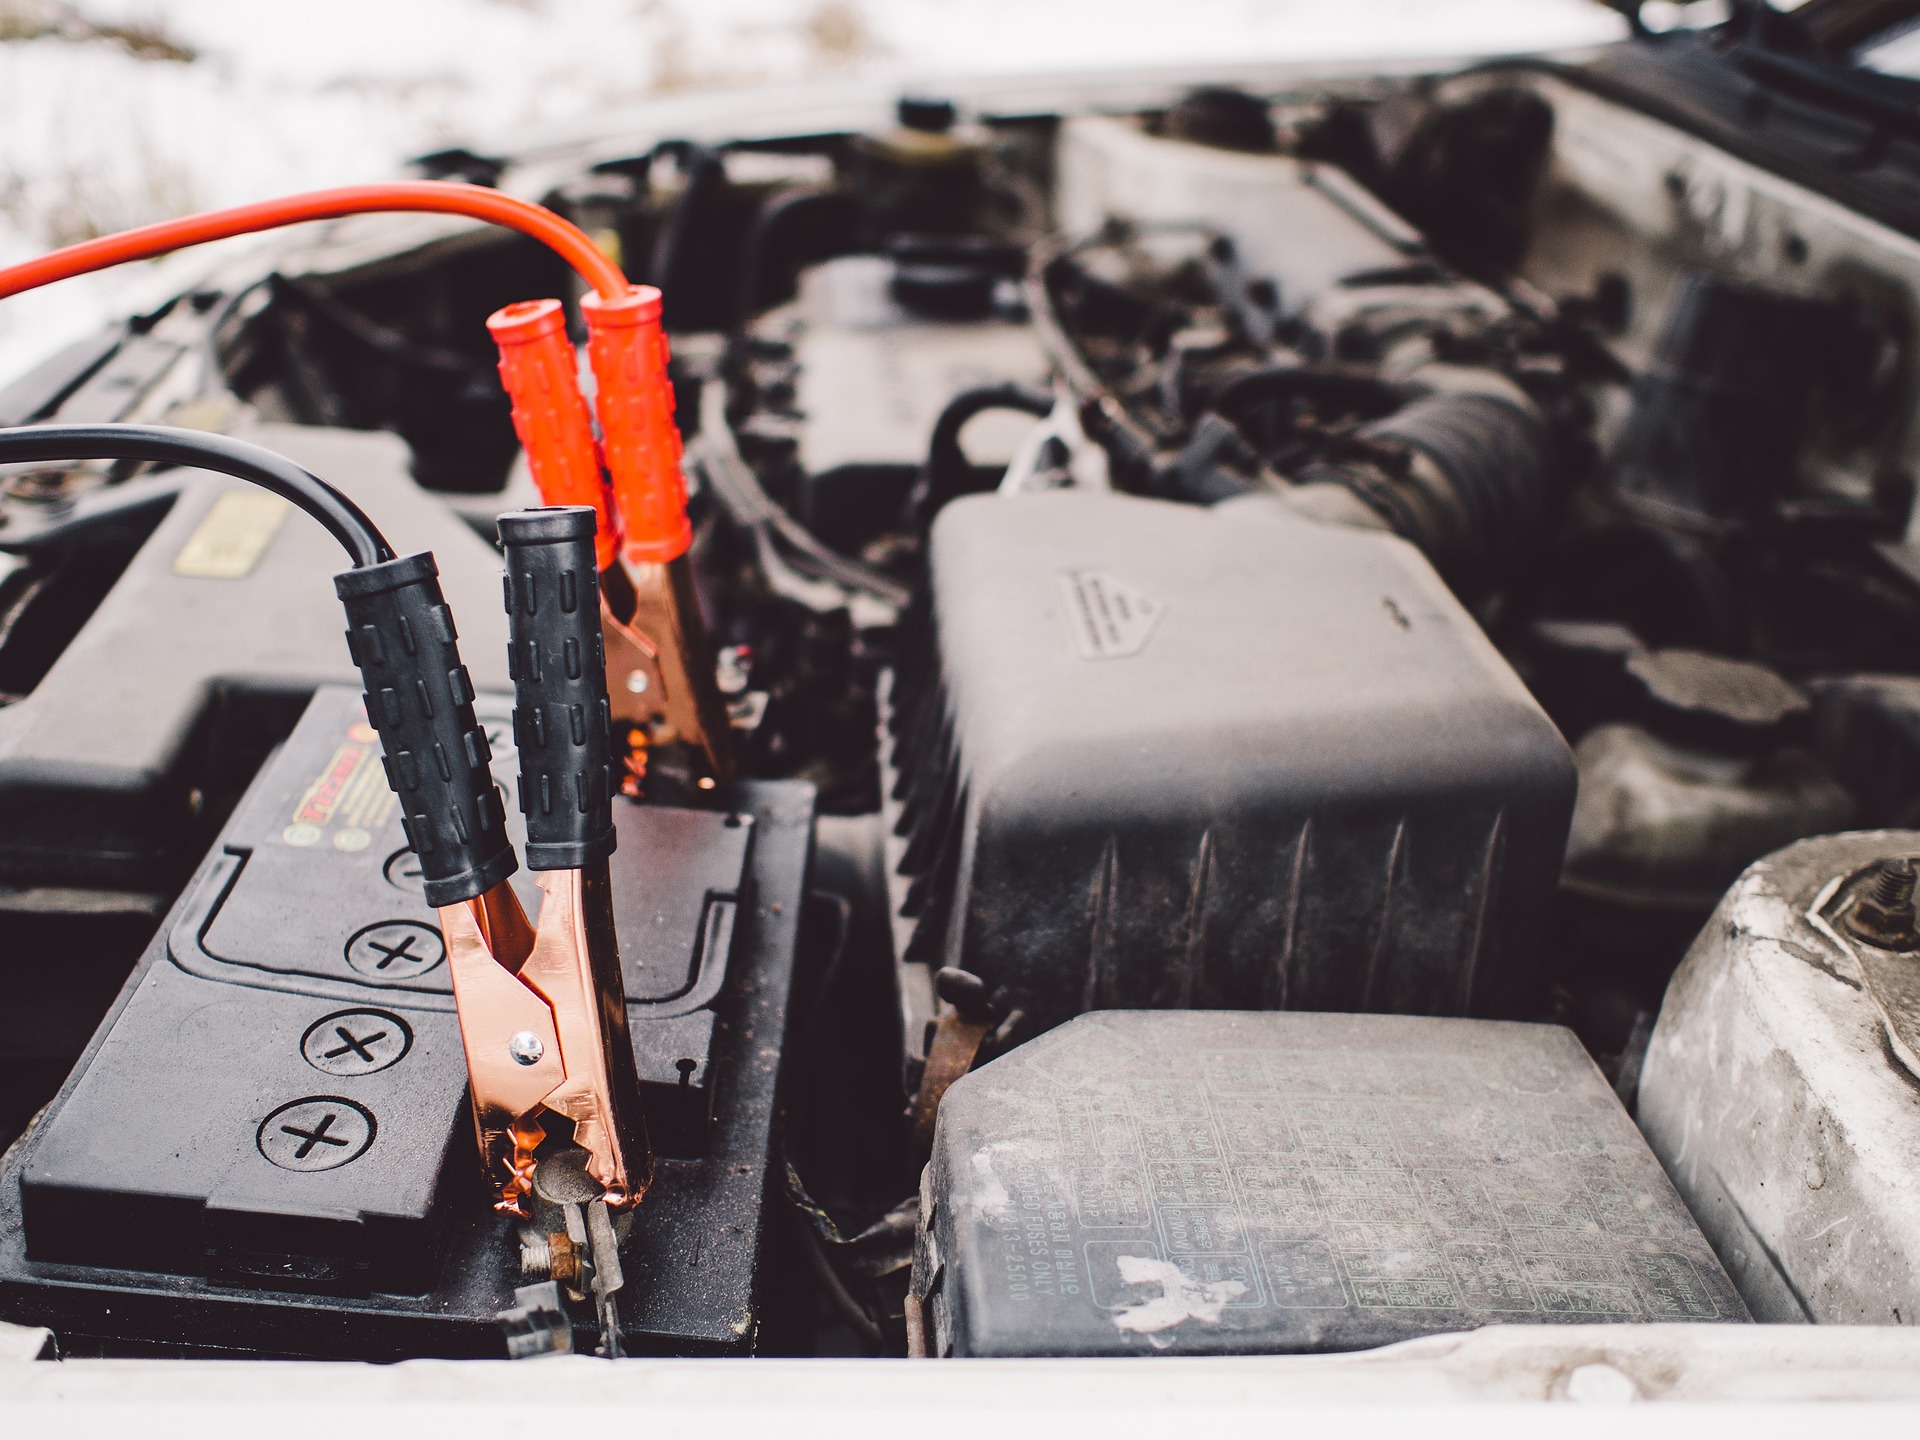 Does Your Chevy Need a New Car Battery? Signs It's Time to Visit the Chevy Dealership